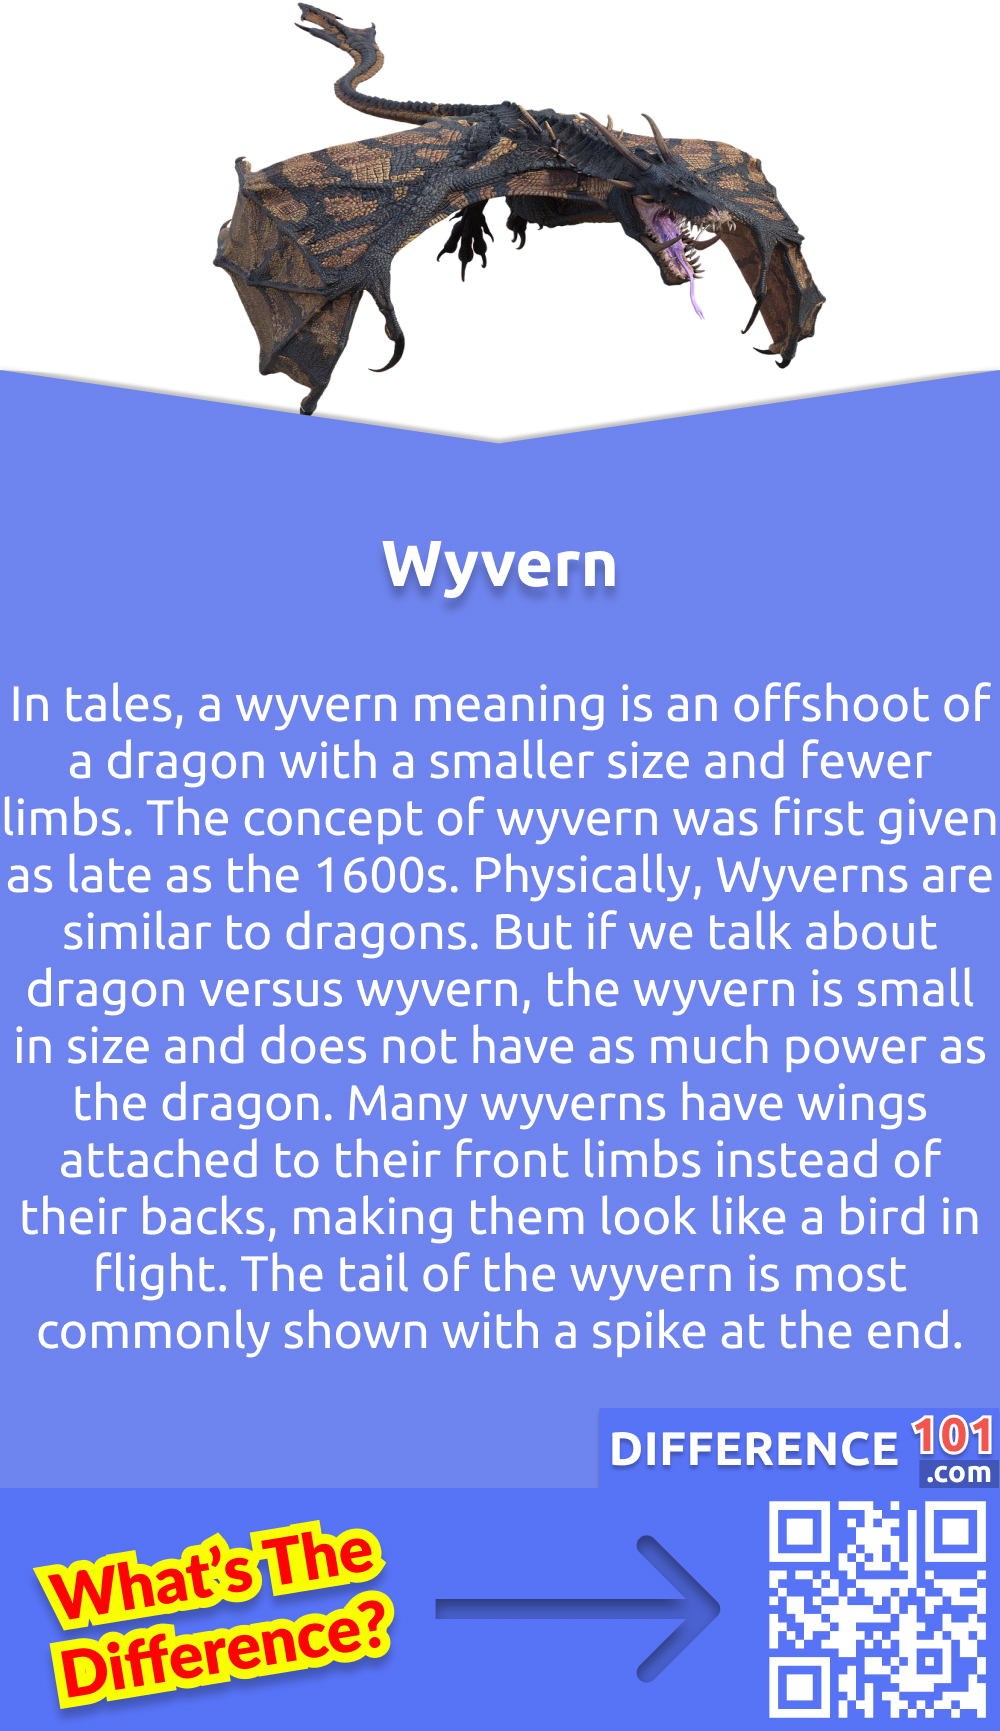 What is Wyvern? In tales, a wyvern meaning is an offshoot of a dragon with a smaller size and fewer limbs. The concept of wyvern was first given as late as the 1600s. Physically, Wyverns are similar to dragons. But if we talk about dragon versus wyvern, the wyvern is small in size and does not have as much power as the dragon. Many wyverns have wings attached to their front limbs instead of their backs, making them look like a bird in flight. Wyverns are typically portrayed as primal beasts rather than sapient creatures. They don’t know any skills and use only magic in their defense. The tail of the wyvern is most commonly shown with a spike at the end.